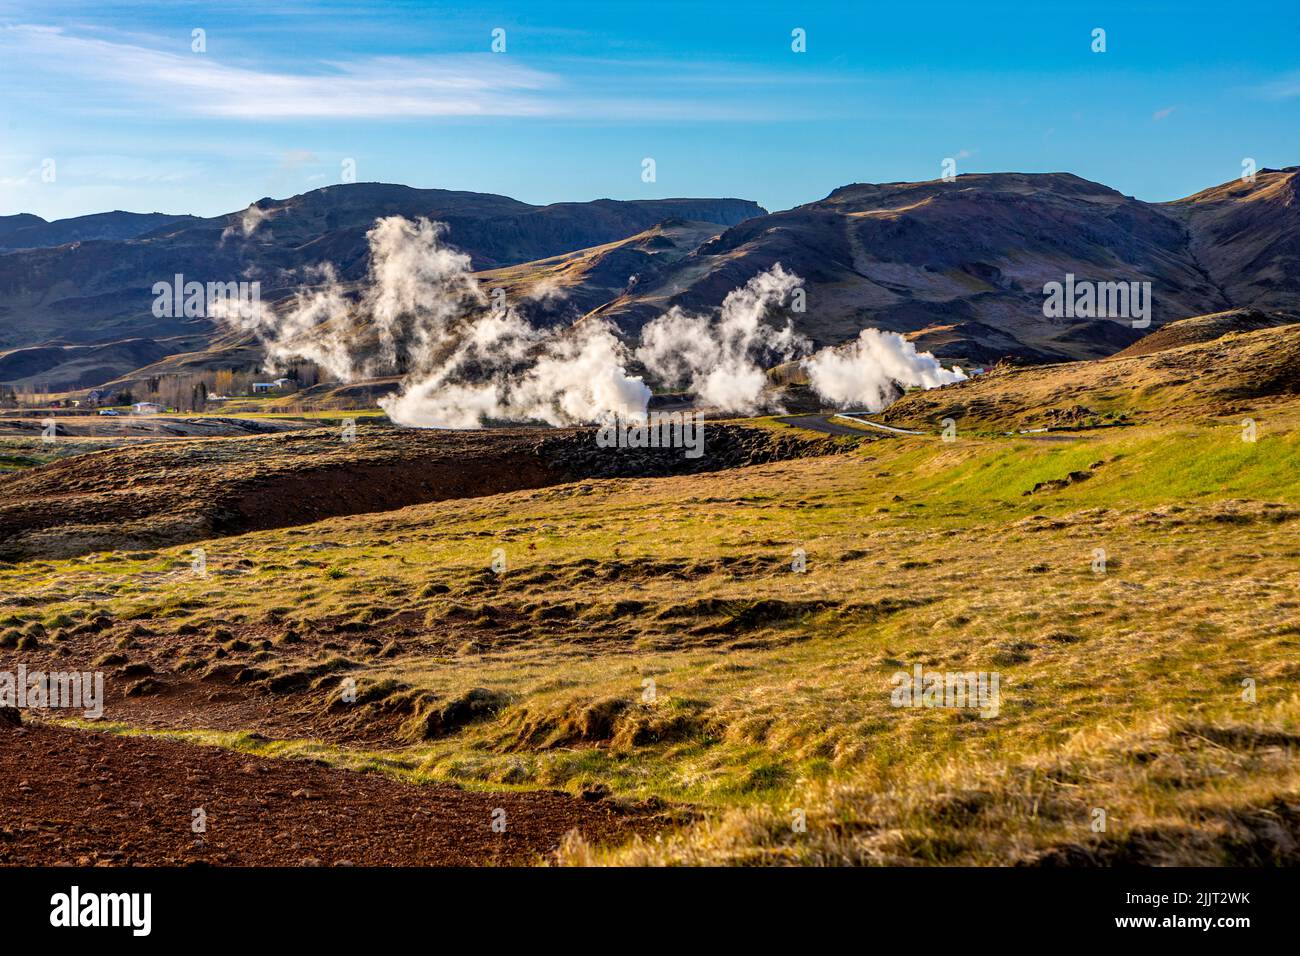 Geothermal steam coming fron vents in the ground near to Hveragerdi, Iceland Stock Photo